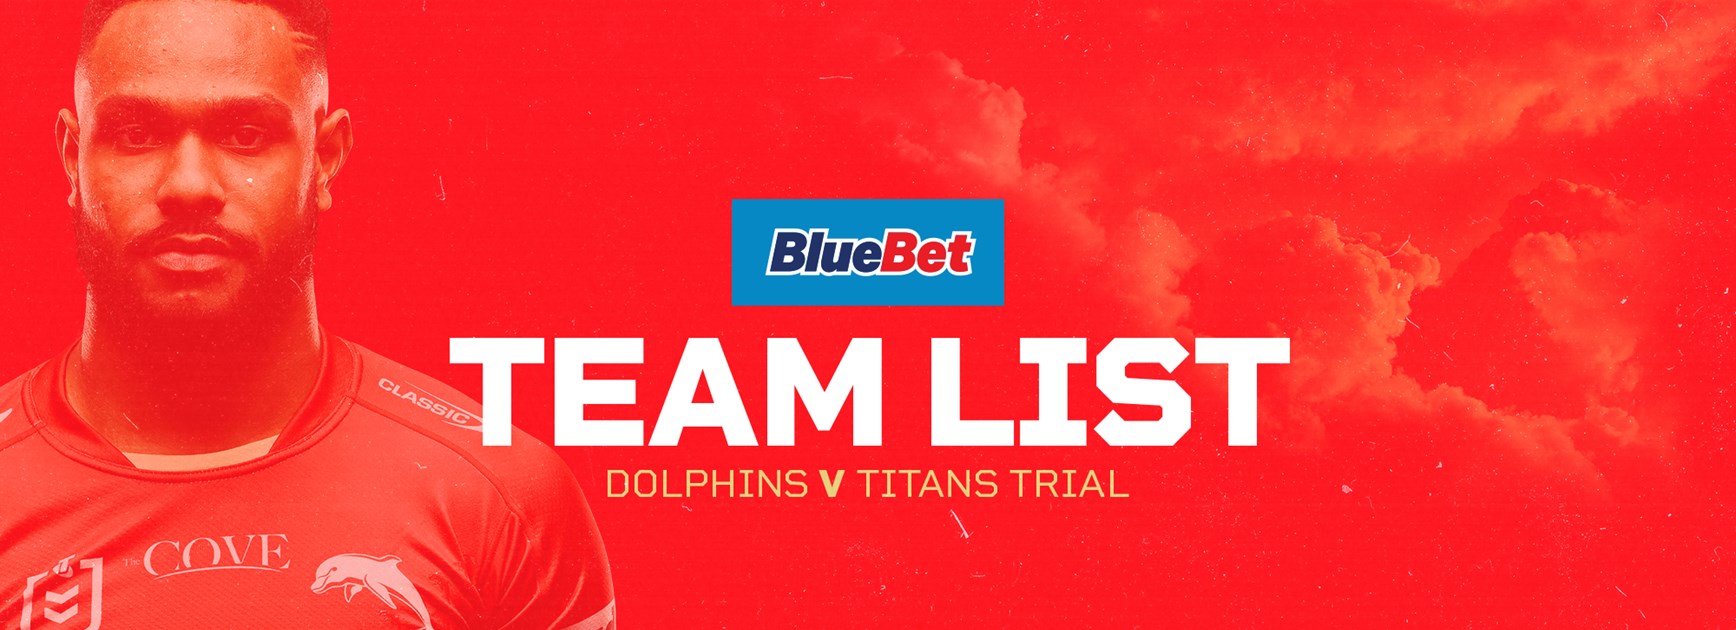 Dolphins near full-strength for Titans trial